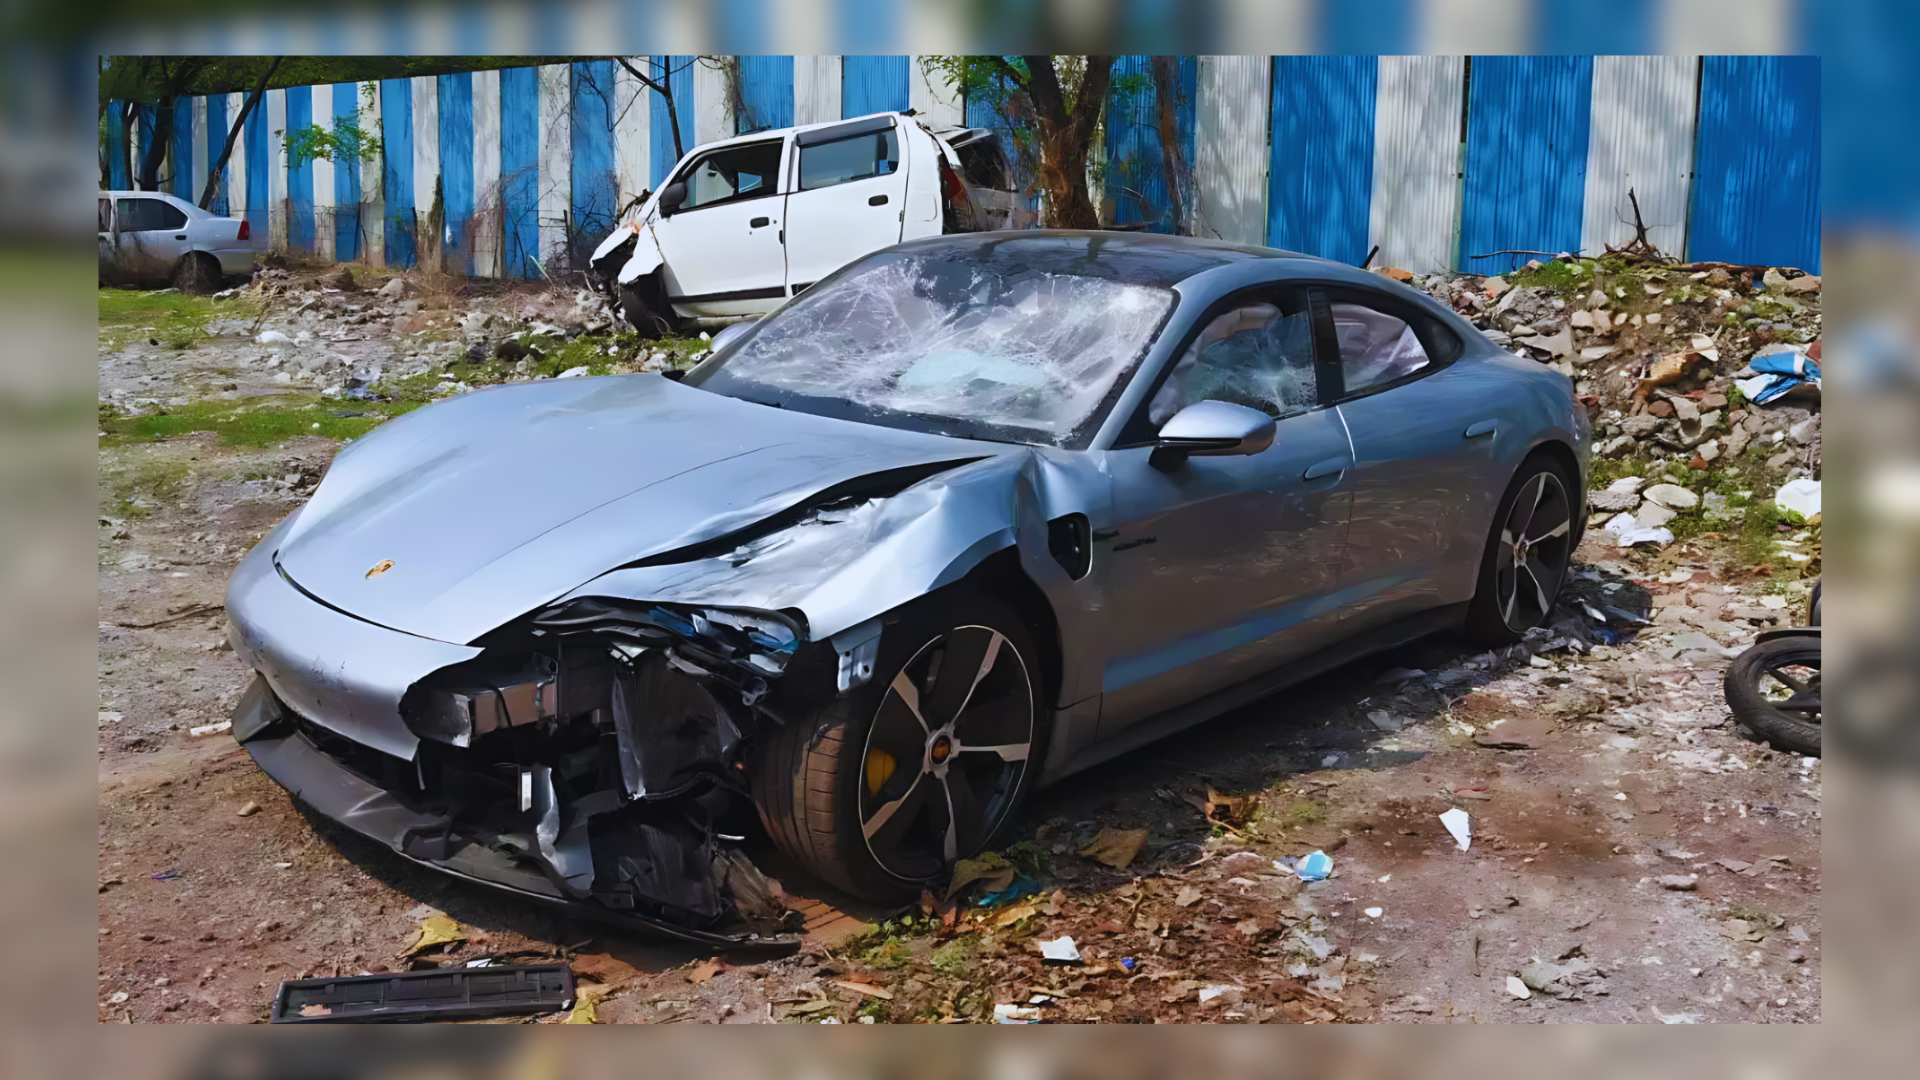 Minor Involved In Pune Porsche Crash Submits Essay On Road Accidents, Complies With Bail Conditions